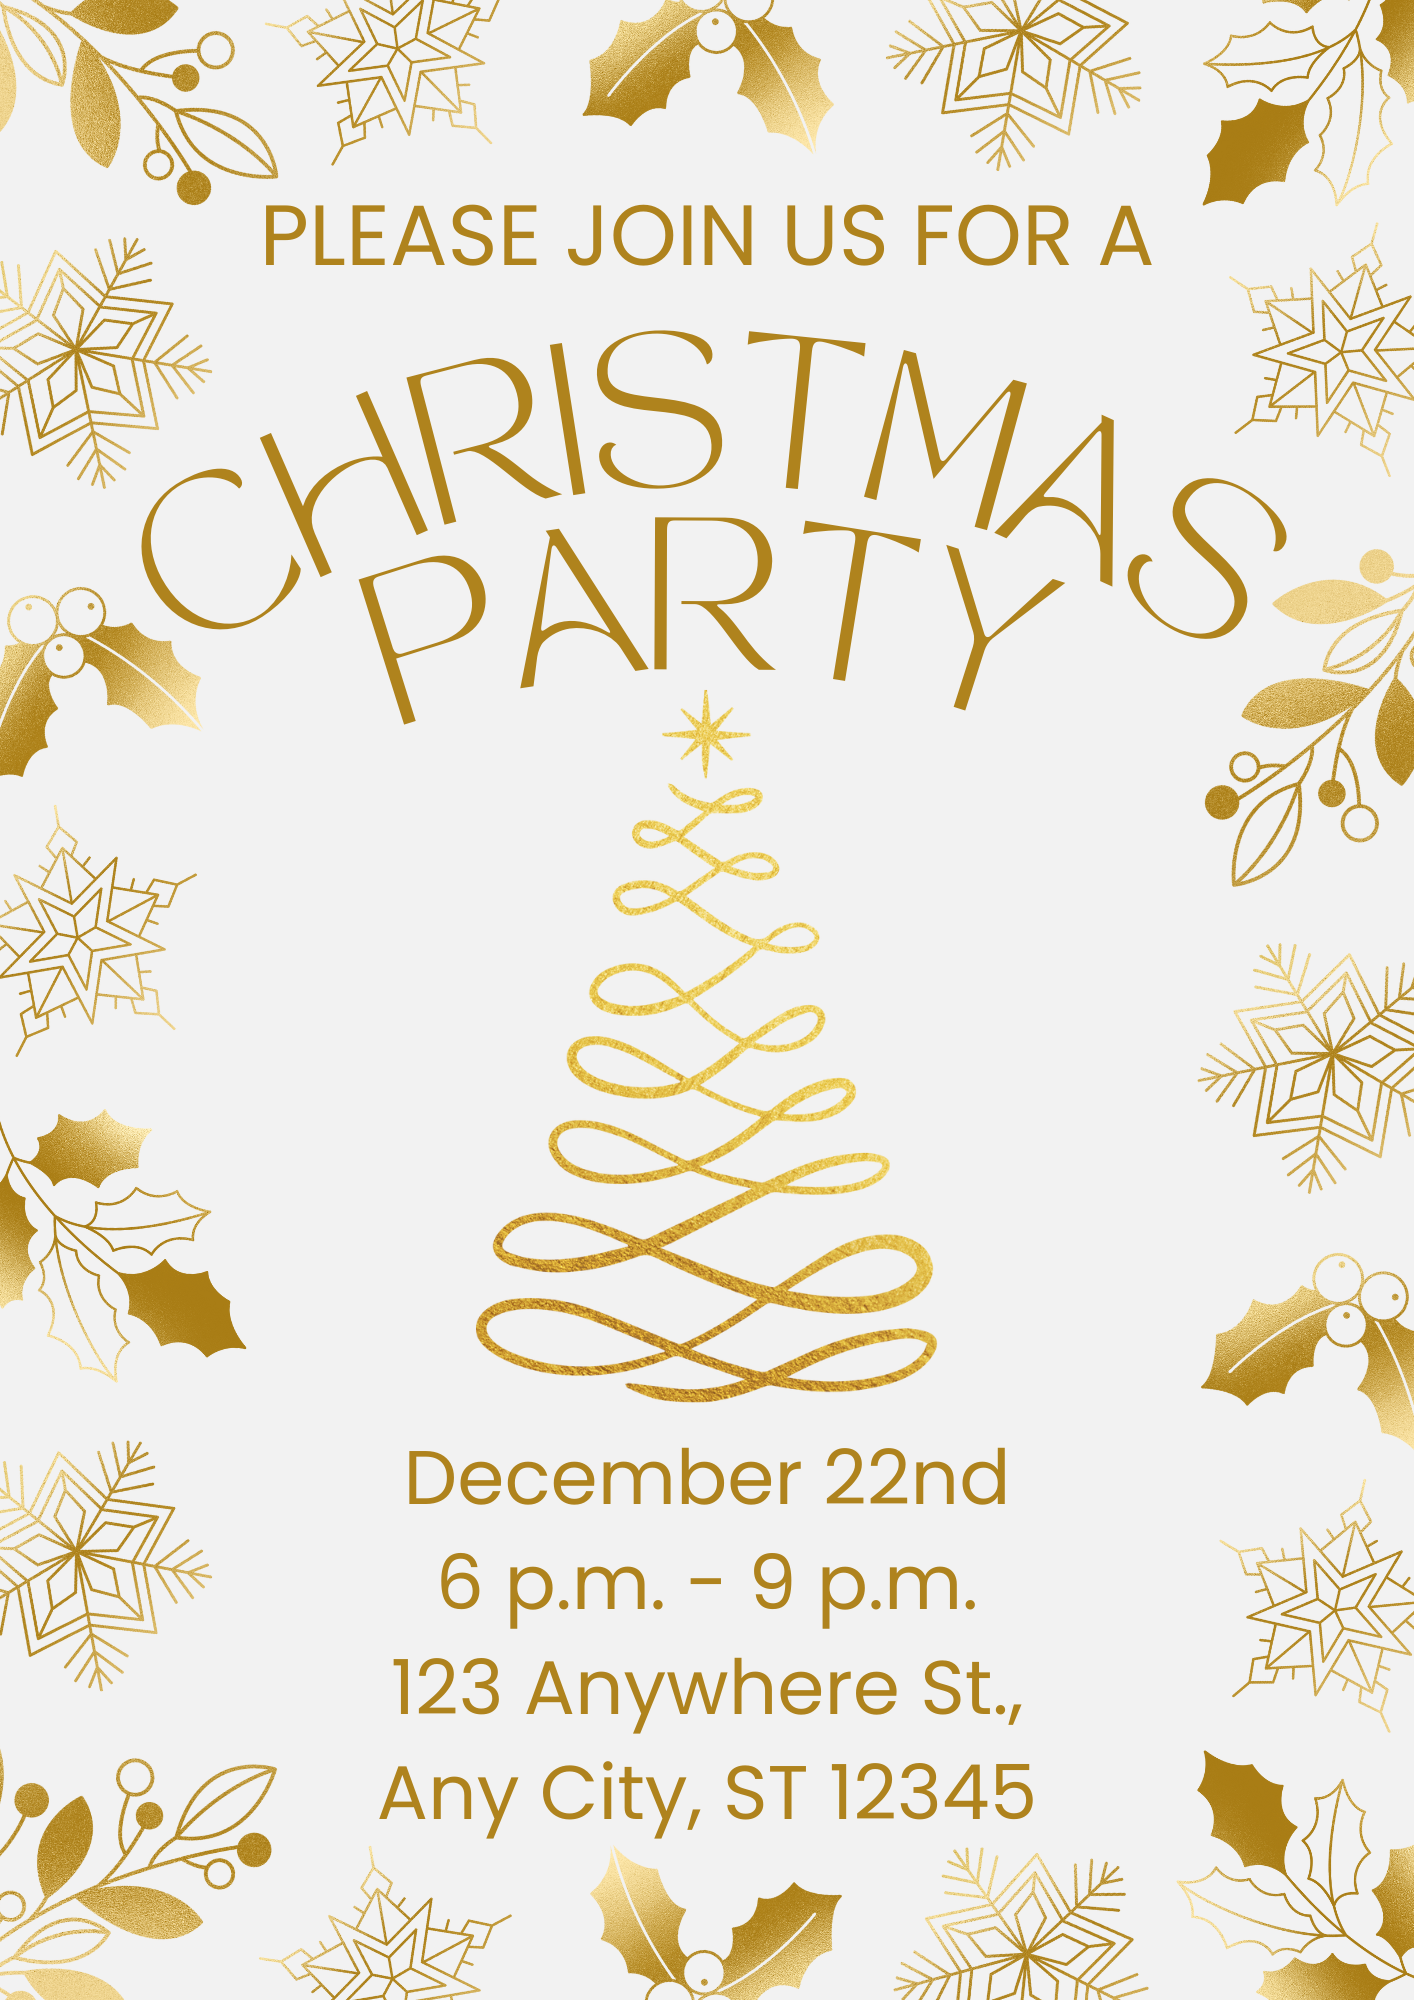 Flyer 7 - Gold Gray Elegant Creative Christmas Party Invitation Flyer.png